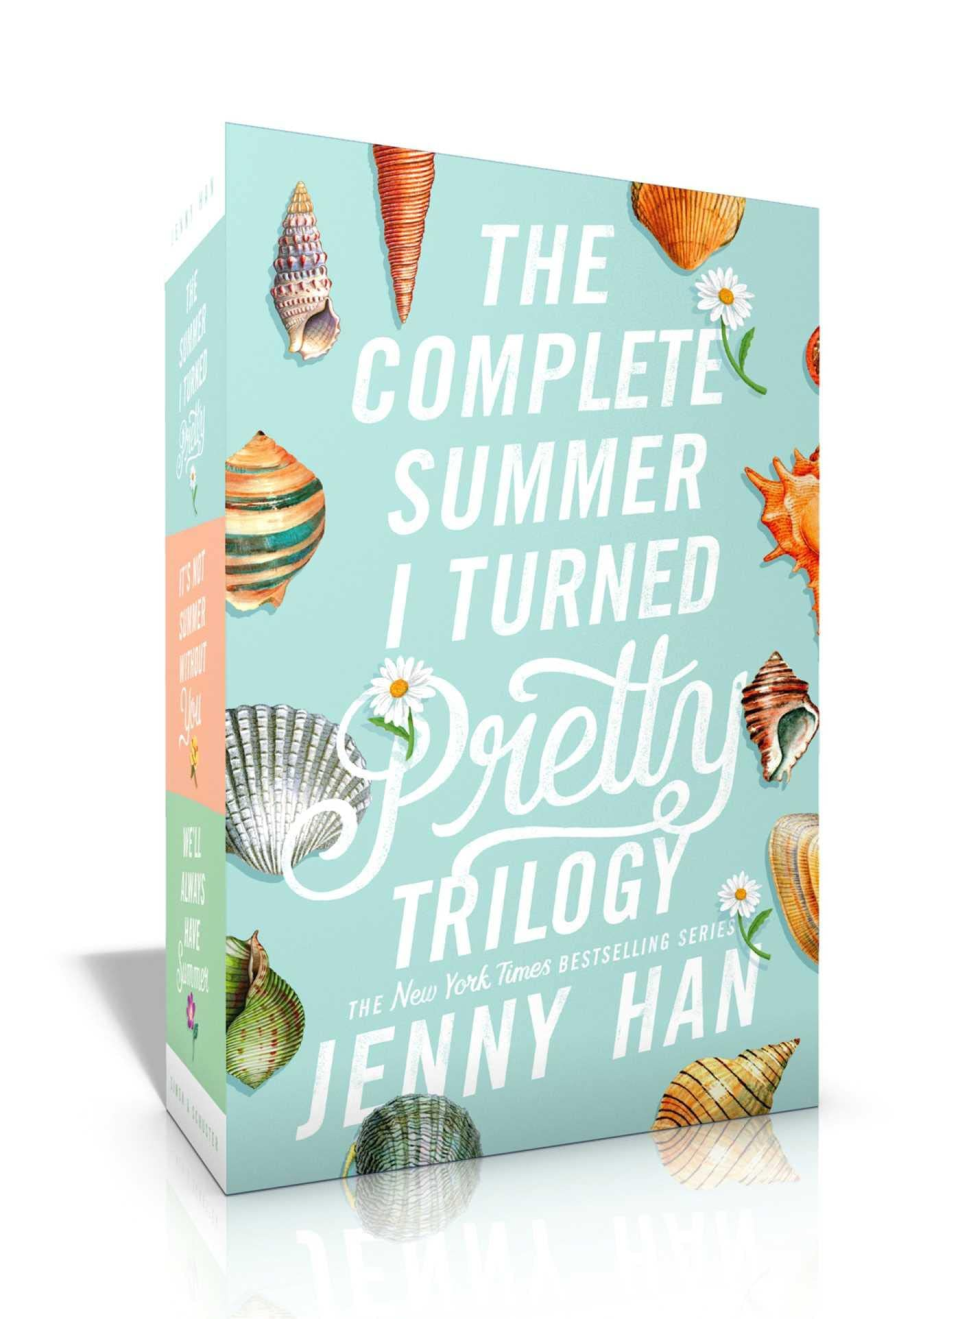 The Complete Summer I Turned Pretty Trilogy Boxed Set